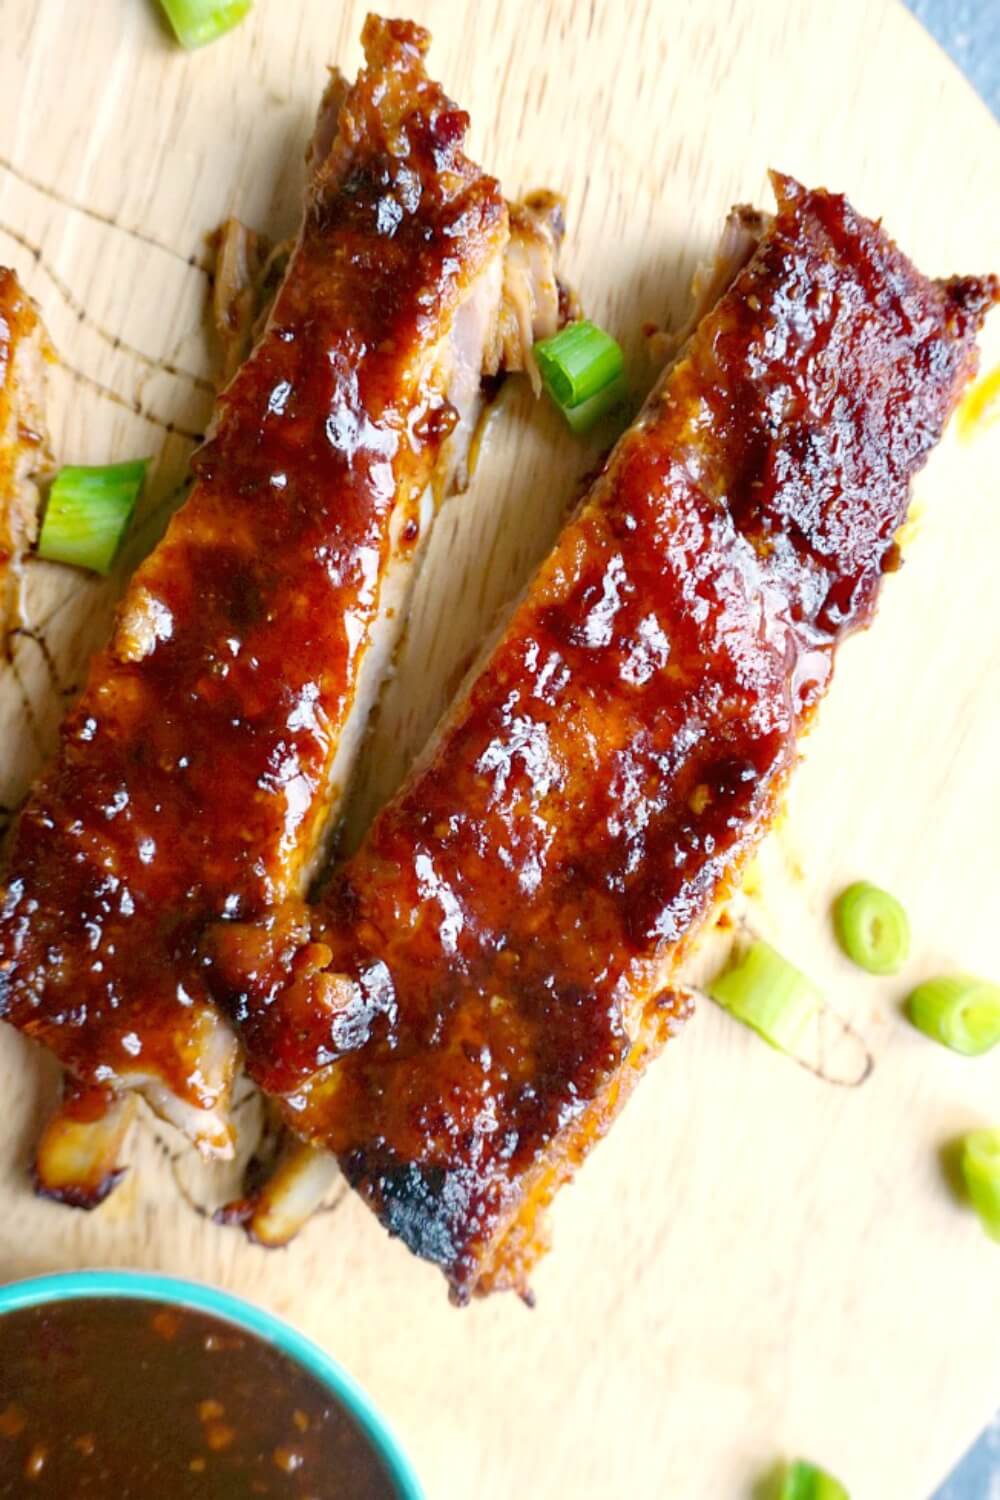 Easy Oven Baked Ribs with Sticky BBQ Sauce, the perfect finger food to feed a crowd. These pork ribs are perfect for Game Day or any other party or celebration. It might be a simple recipe, but these BBQ ribs are heavenly flavourful, and the Asian touch takes them to the very next level. The best ribs for Superbowl, they can be easily made with any other sauce of your choice. #porkribs, #bakeribs, #superbowlfood, #gamedayrecipes,#bbqsauce